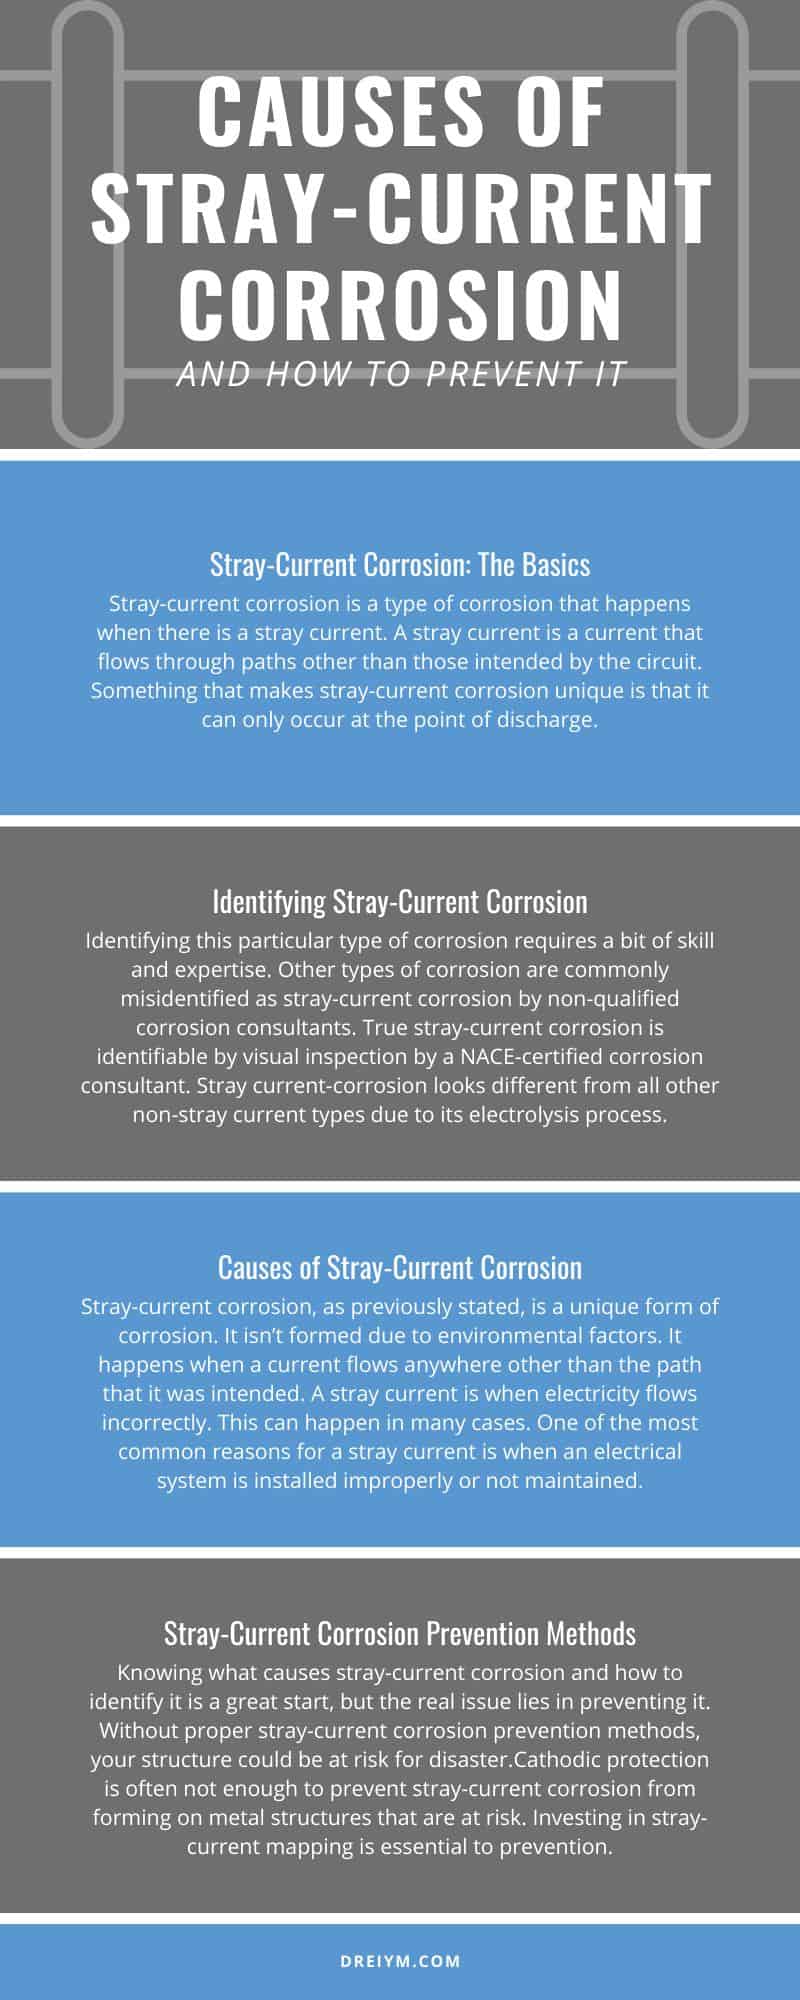 Causes of Stray-Current Corrosion and How To Prevent It